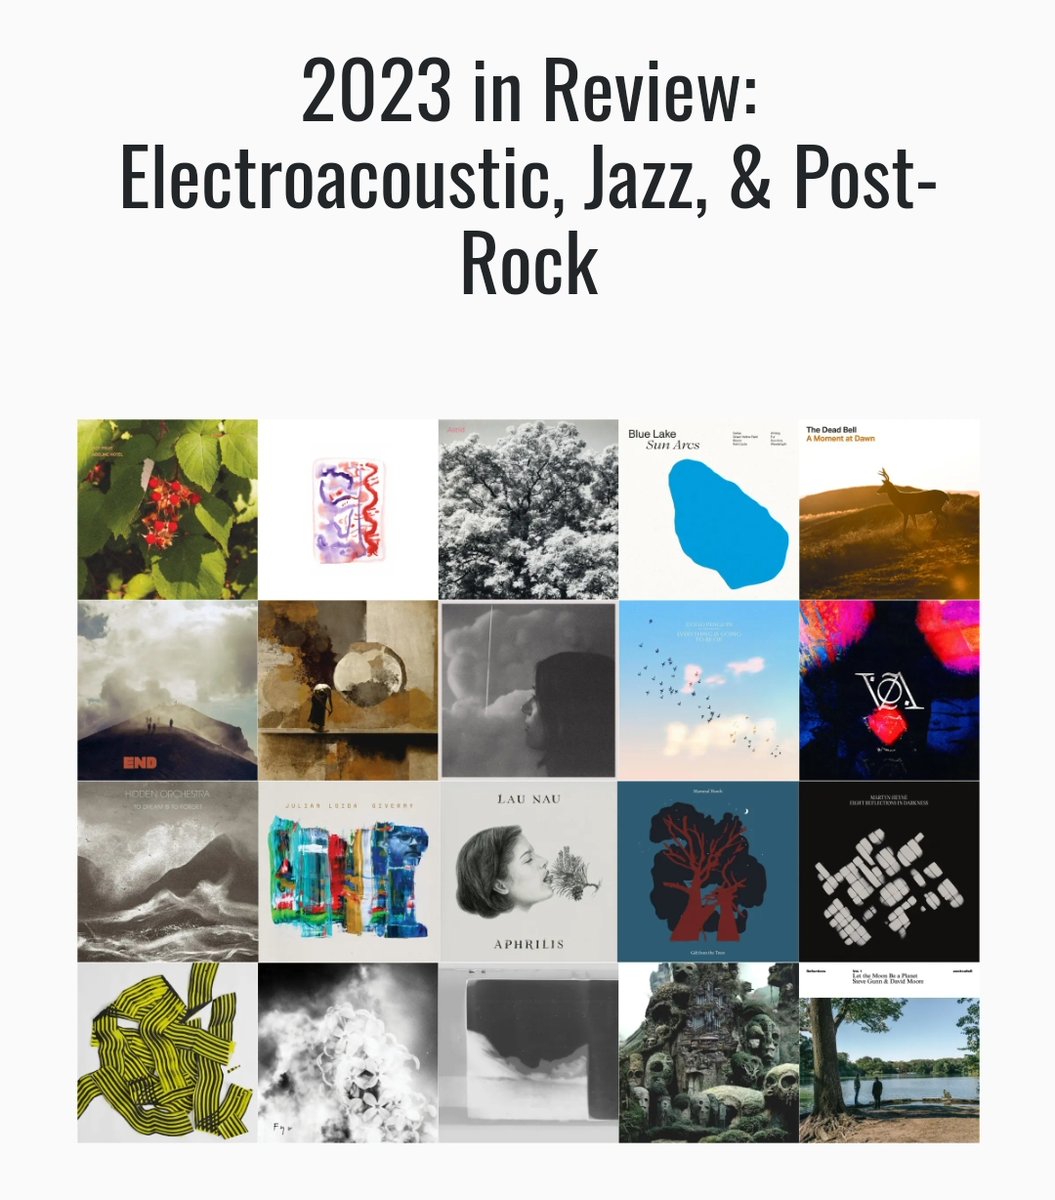 The year in review continues with a selection of releases from the musical edge lands where electroacoustic music and field recordings meet folk, jazz, post-rock, and other analog experiments in sound: stationarytravels.wordpress.com/2023/12/27/202…